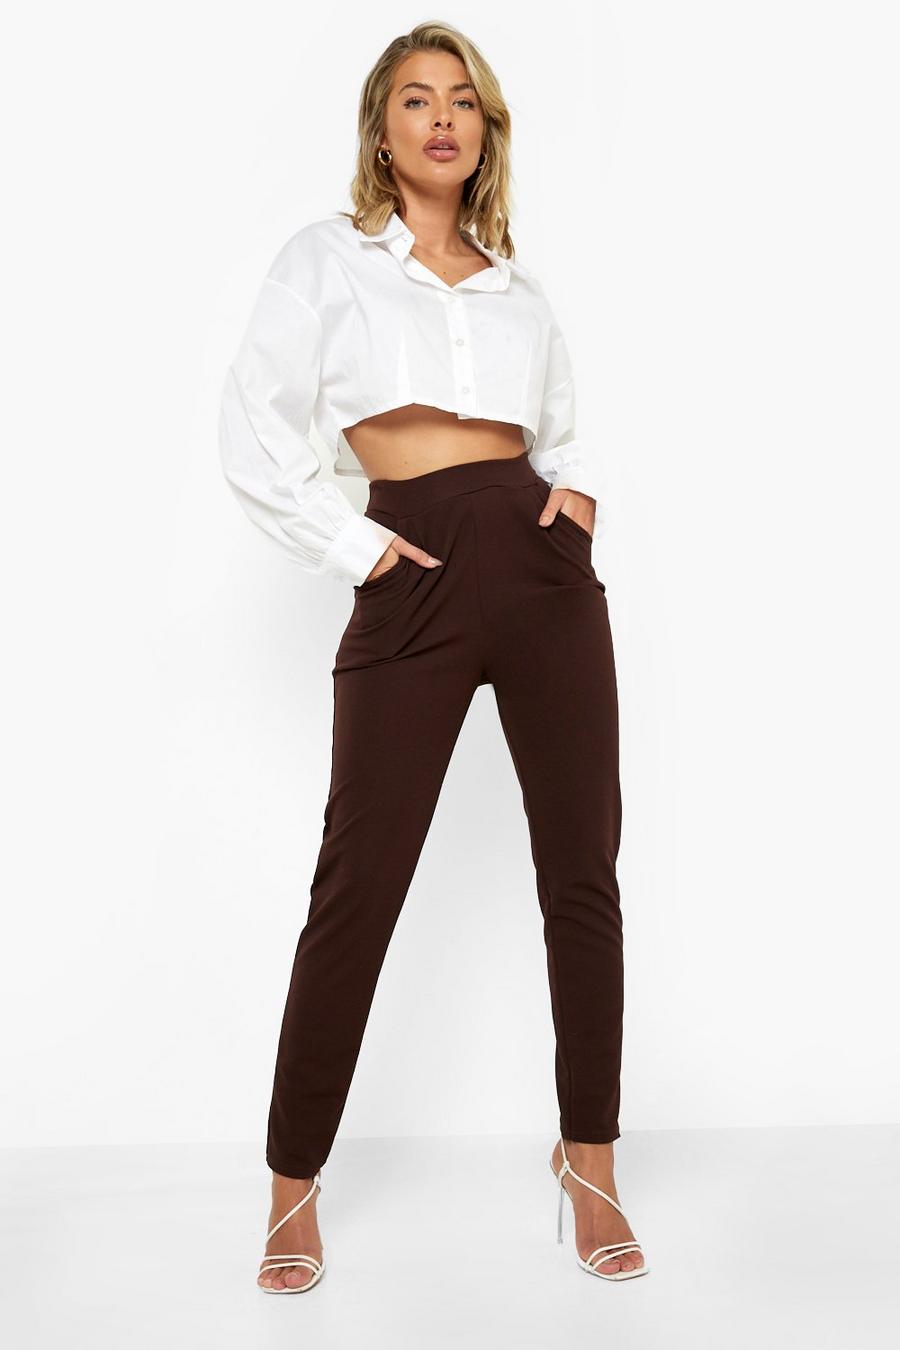 Chocolate brown High Waisted Pleat Front Tapered Work Pants